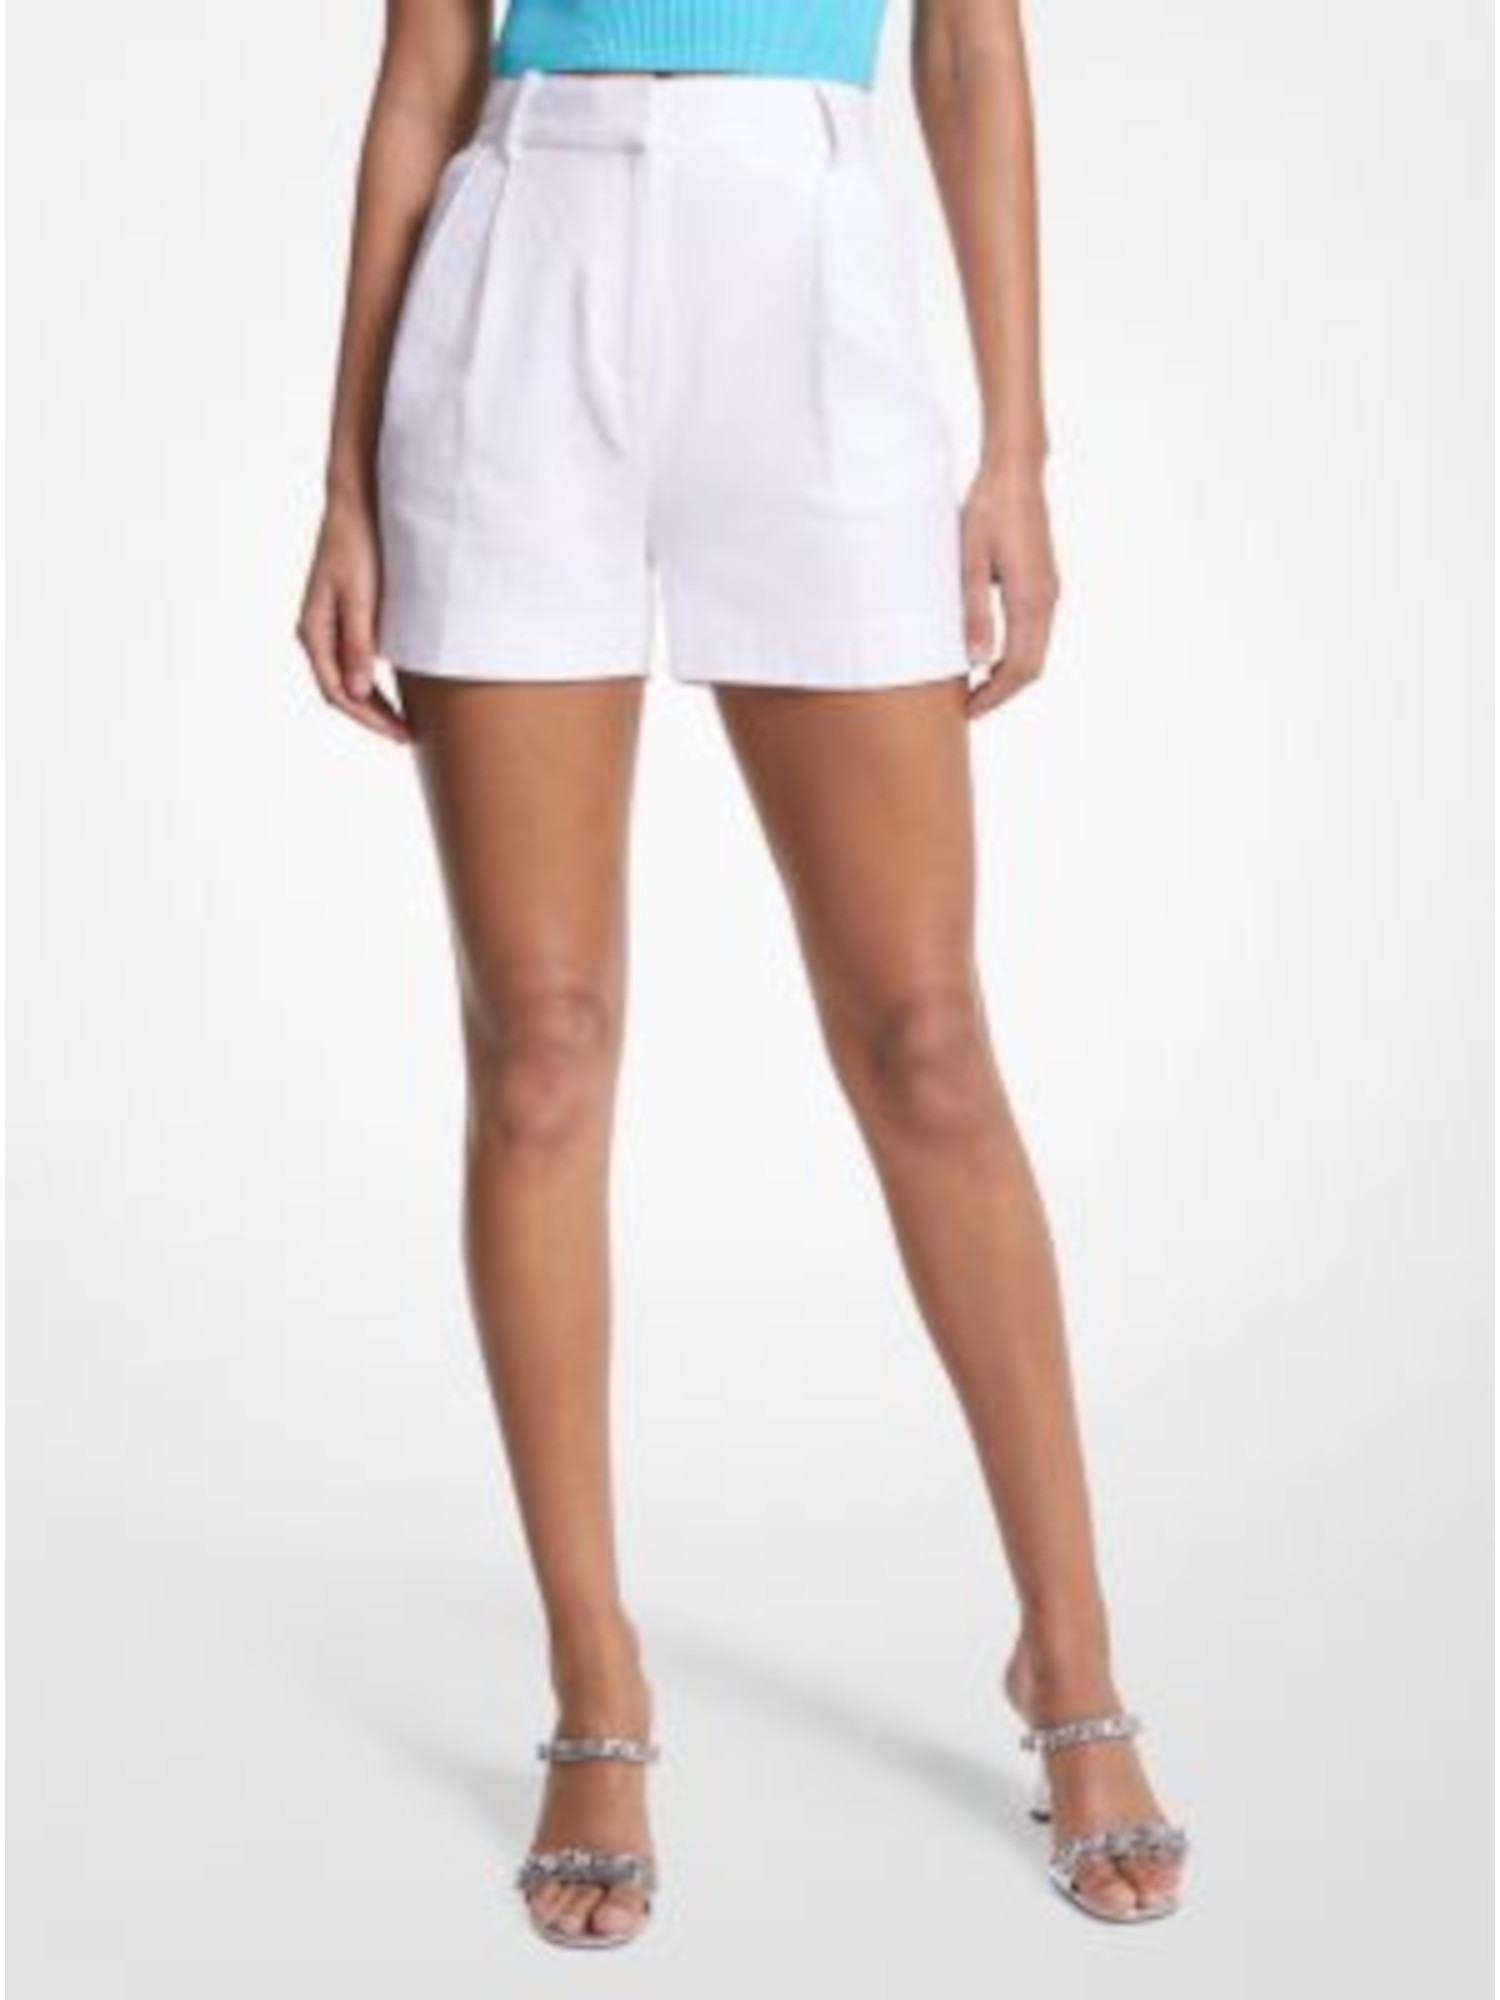 Michael Kors MICHAEL MICHAEL KORS Womens White Zippered Pocketed Relaxed Fit High Waist Shorts Plus 16W